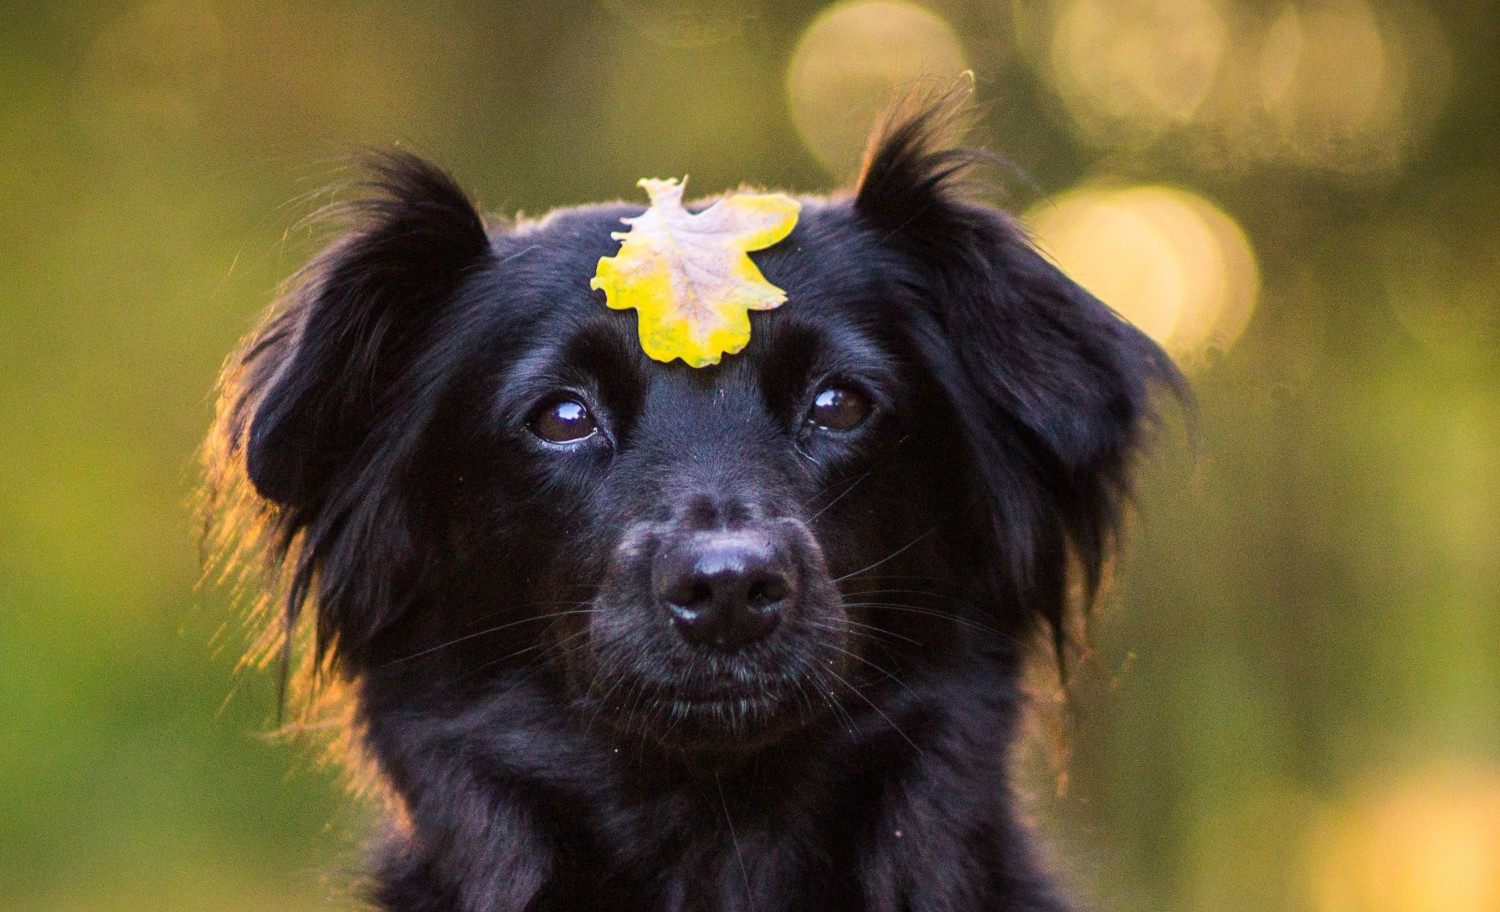 Black Dog with Flower on head